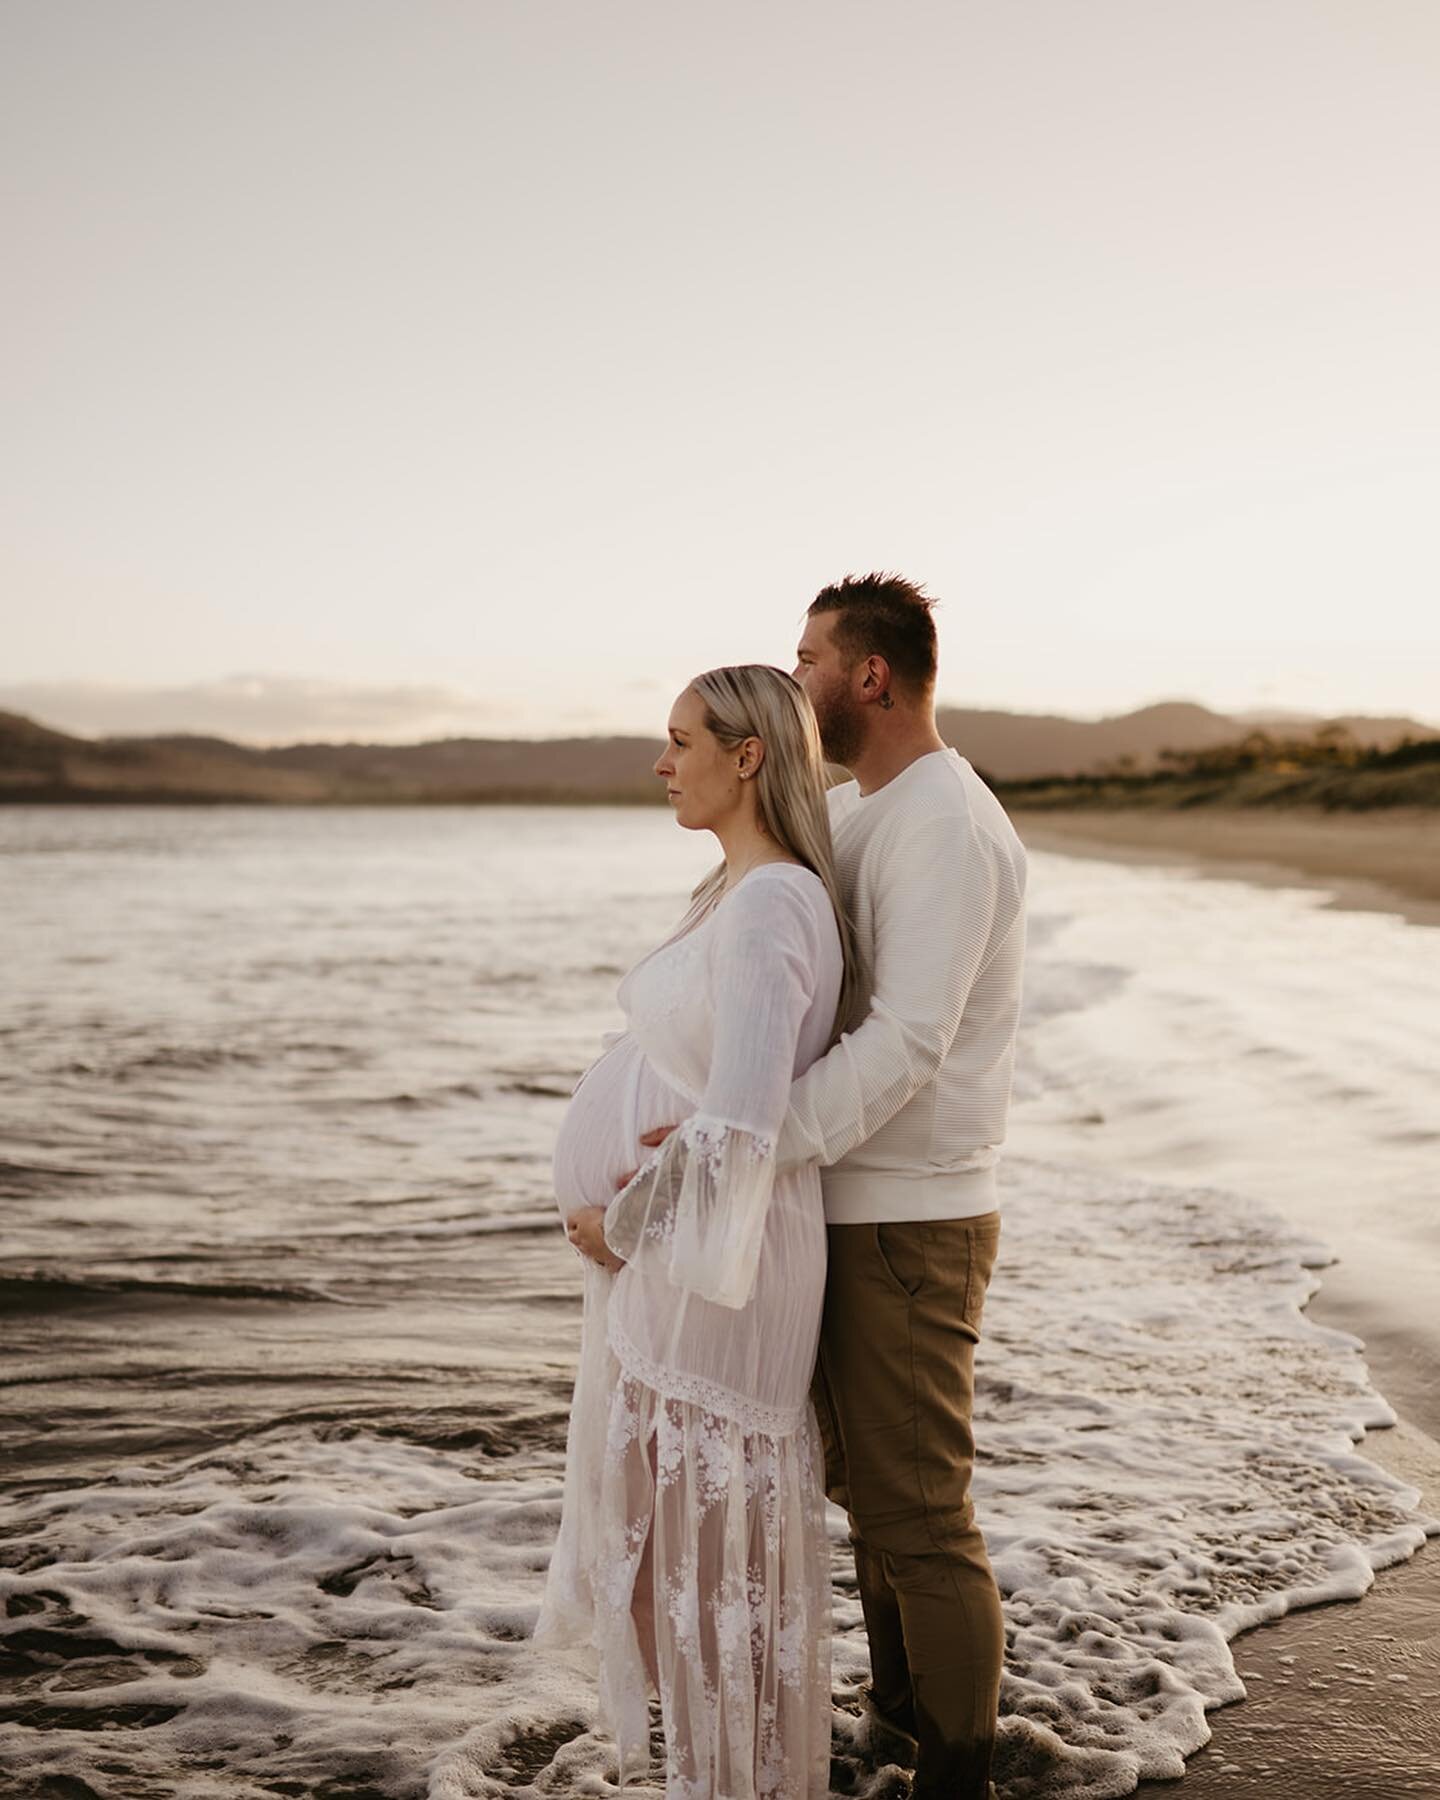 I&rsquo;ve had so many gorgeous sunset shoots over the past couple of weeks thanks to some beautiful Tassie nights!

Gorgeous Lucy &amp; Brad
 

#hobartphotography #hobartmaternityphotographer #hobartfamilyphotographer #babyphotoshobart #hobartbabyph